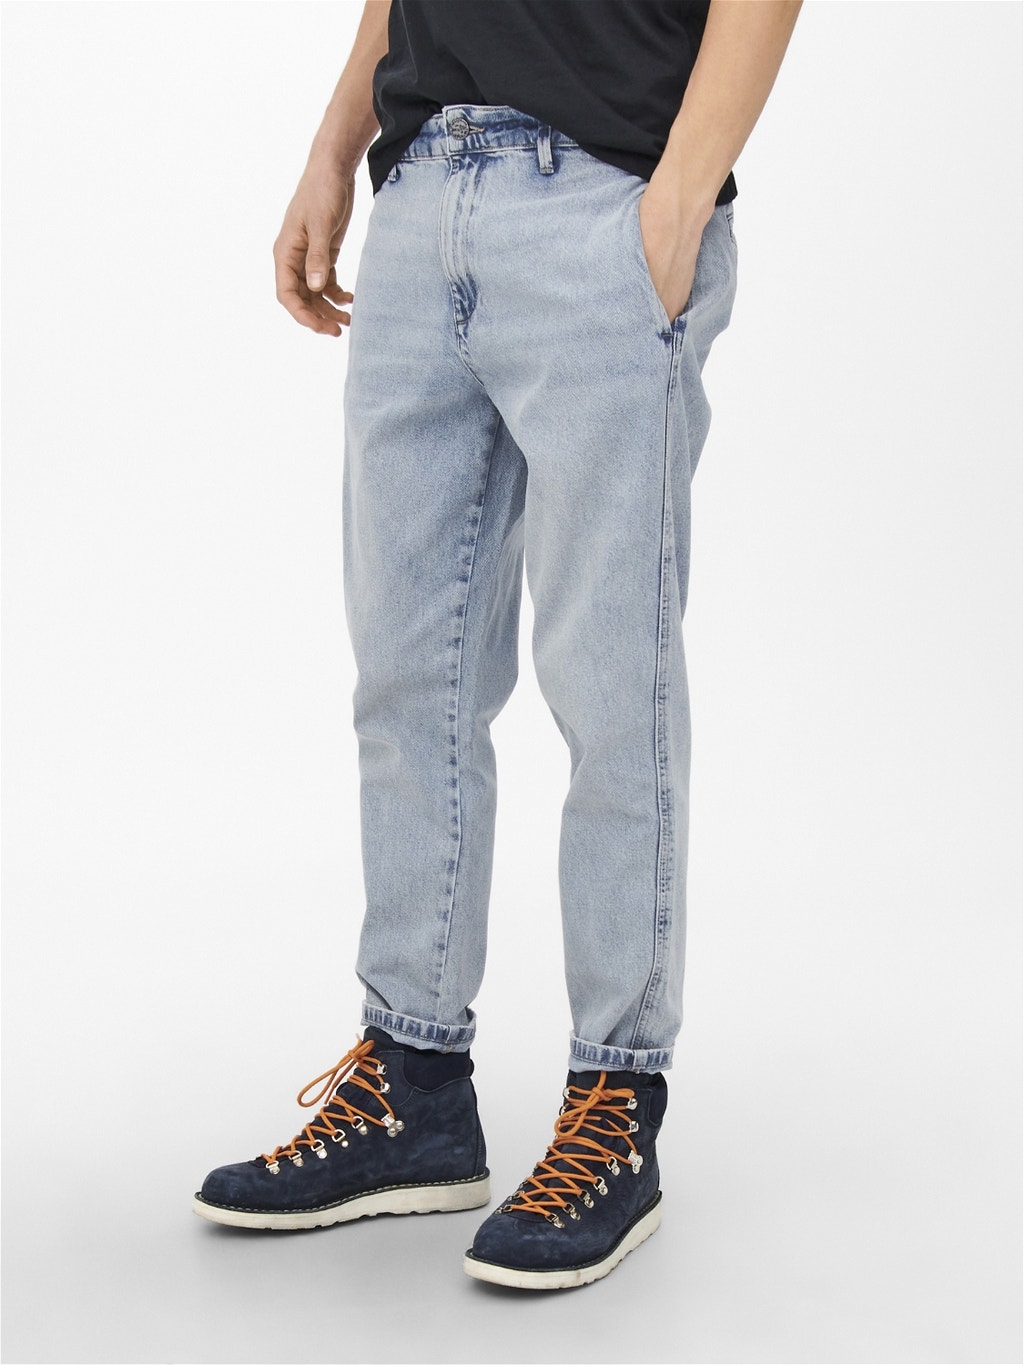 ONSAVI CHINO WASHED con 50% de descuento | ONLY & SONS®